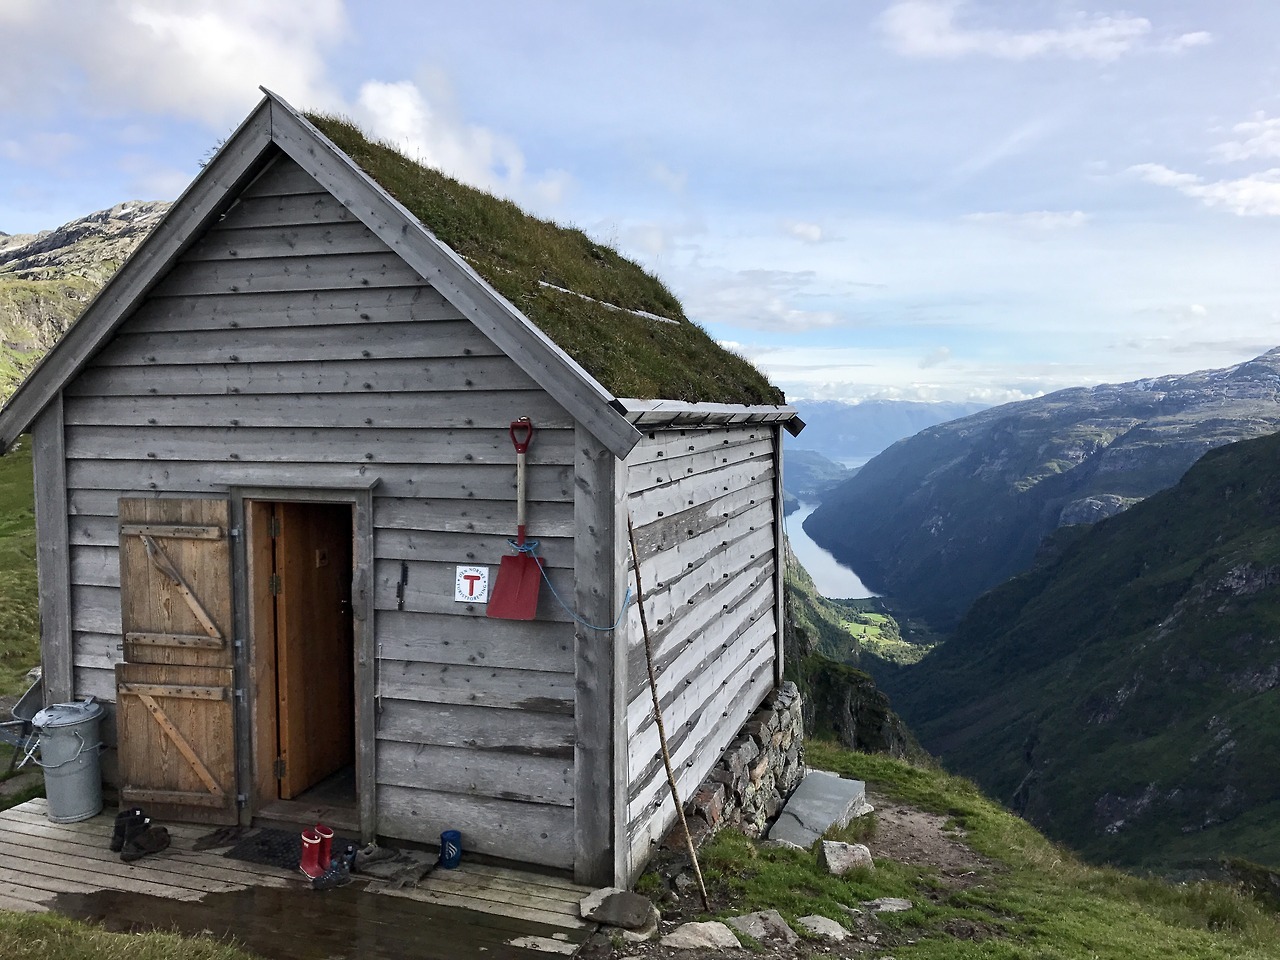 DNT cabin in Norway
Submitted by Alex Masse
“english.dnt.no
The local member associations operate 500 cabins across the country, mark routes and ski tracks. Together they maintain a network of about 20,000 km of marked foot trails and about 7000 km...